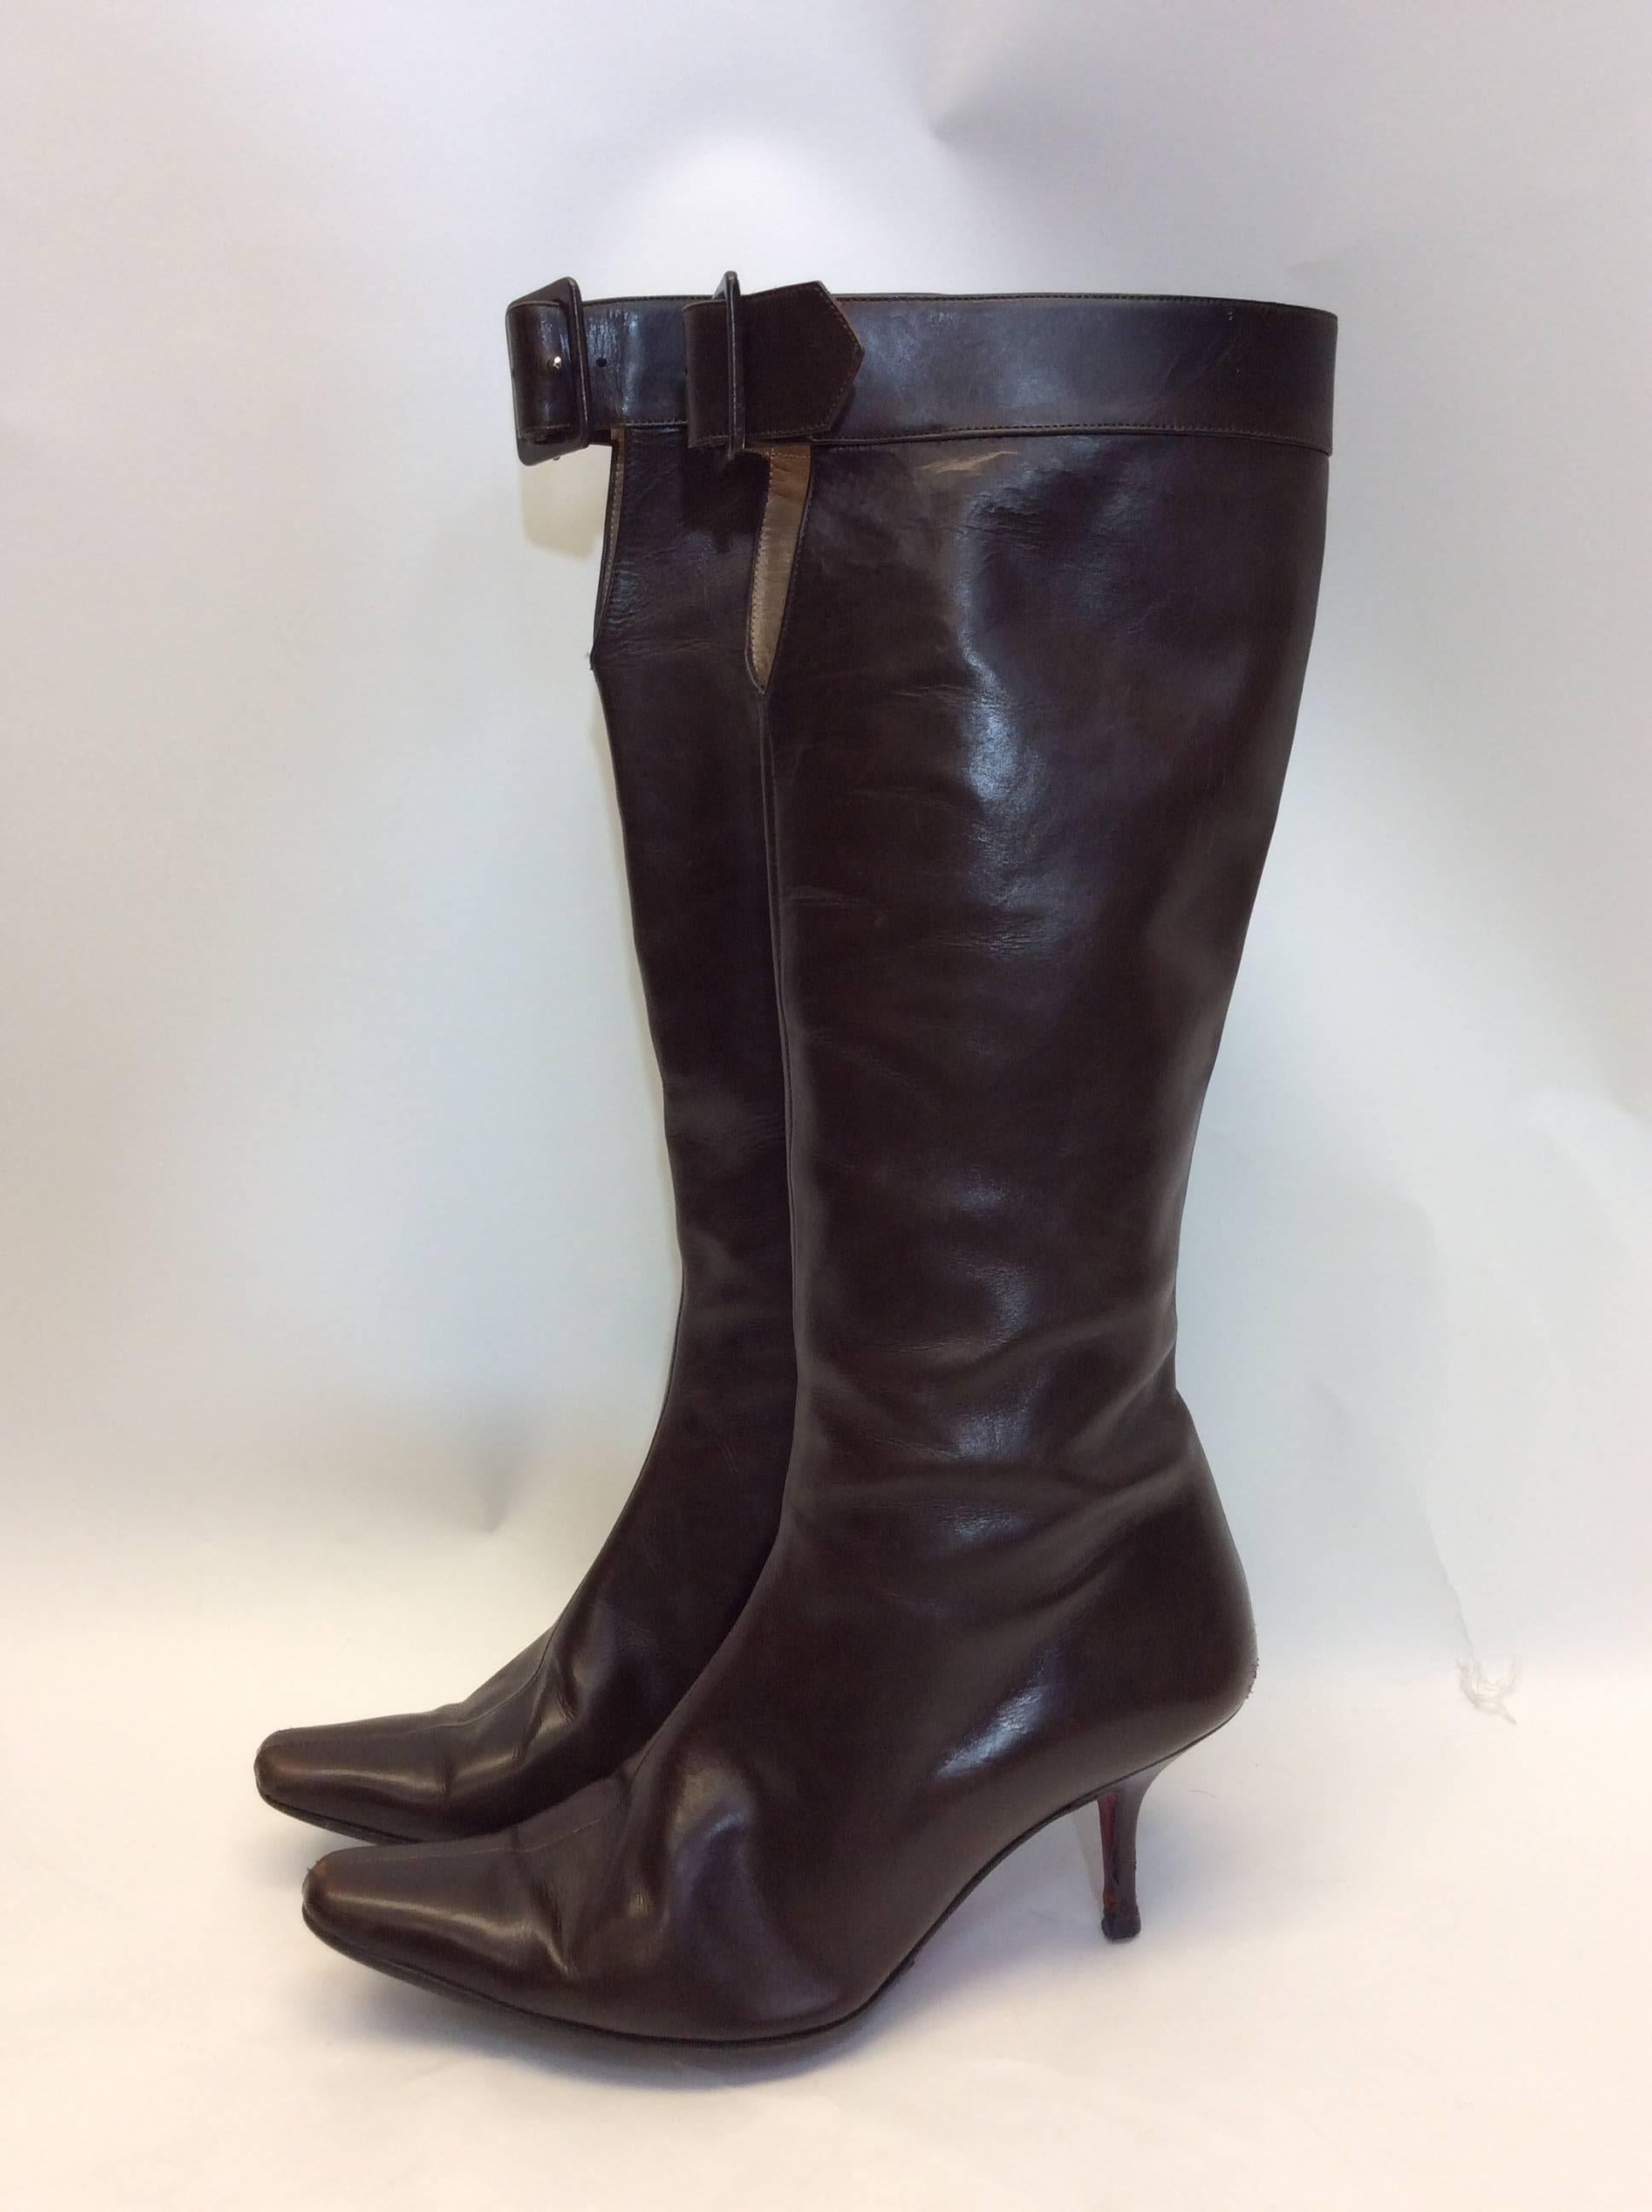 Christian Louboutin Brown Leather Buckle Boots
$250
Size 36.5
2.5 inch heel size zipper and top front buckle 
Made in Italy
**signs of wear on heels, see photo